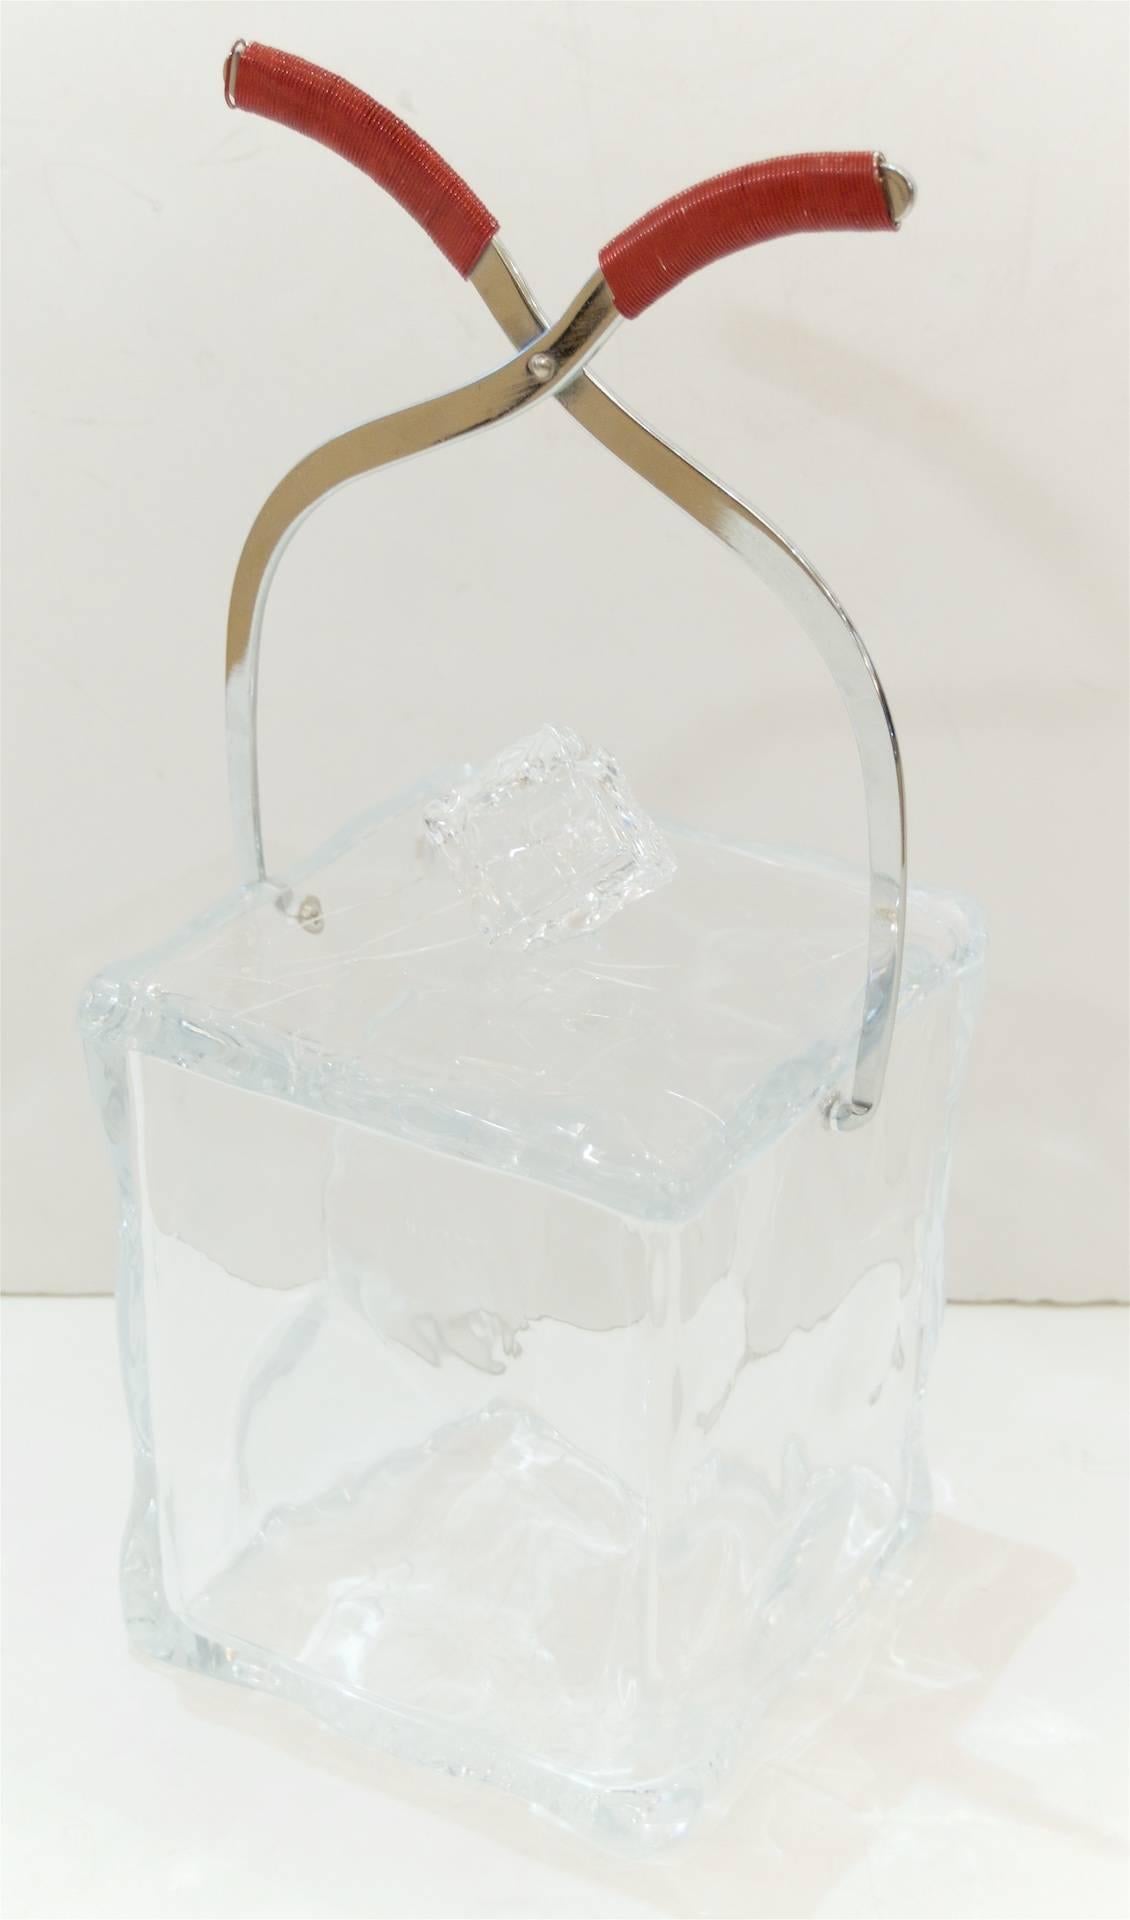 Unusual Lucite ice bucket has the look of an ice cube with chrome ice tongs, the handles made of wrapped red metal. A wonderful unique addition to the bar.